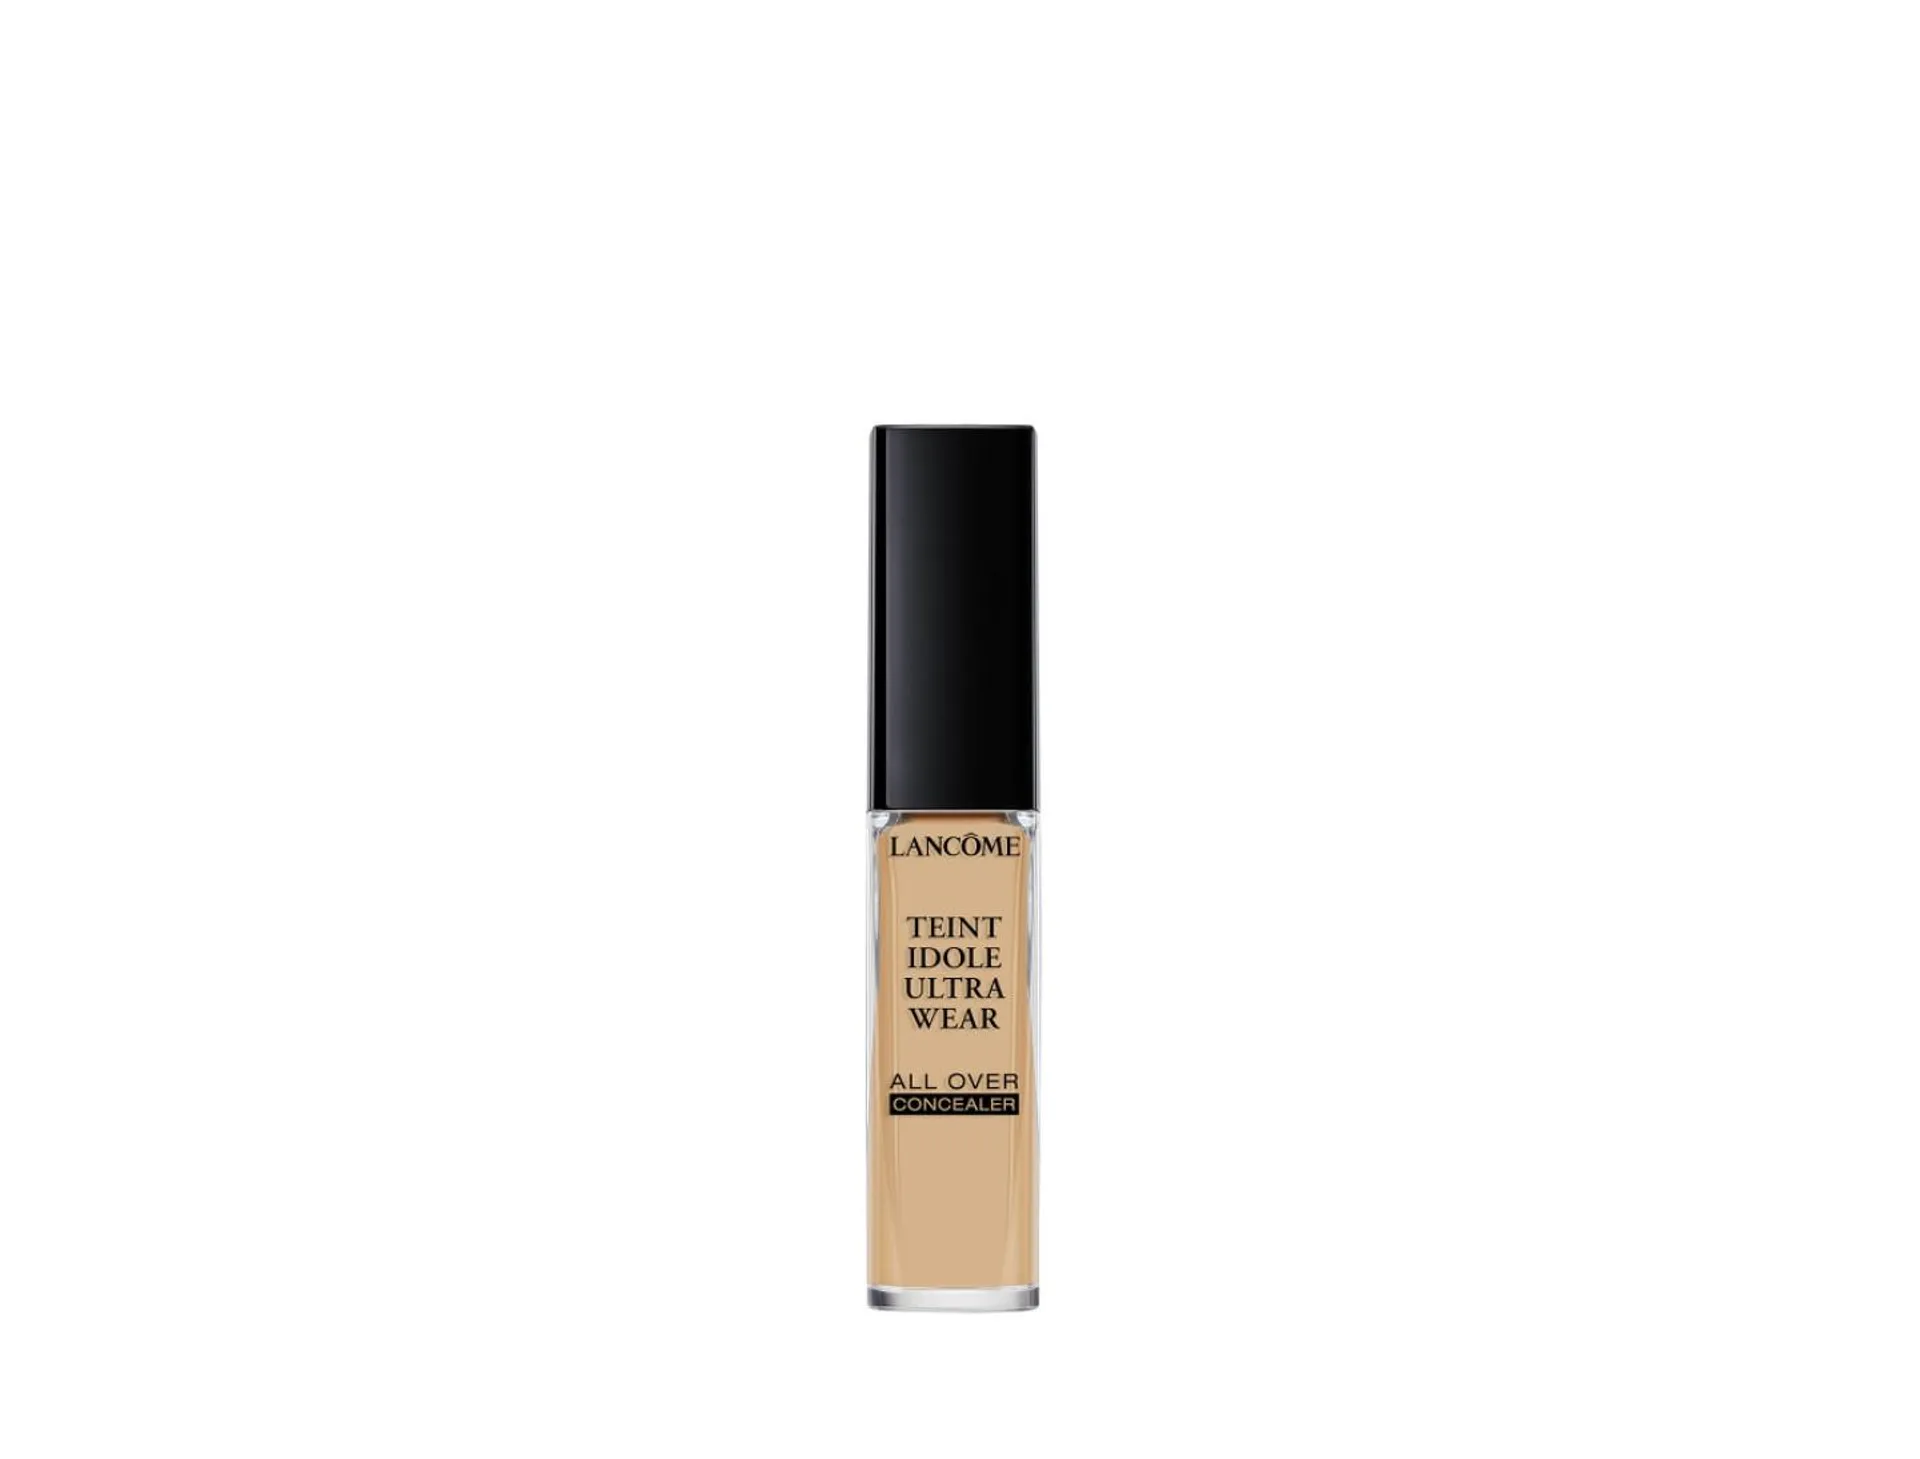 TEINT IDOLE ULTRA WEAR ALL OVER CONCEALER CORRECTOR 024 BISQUE